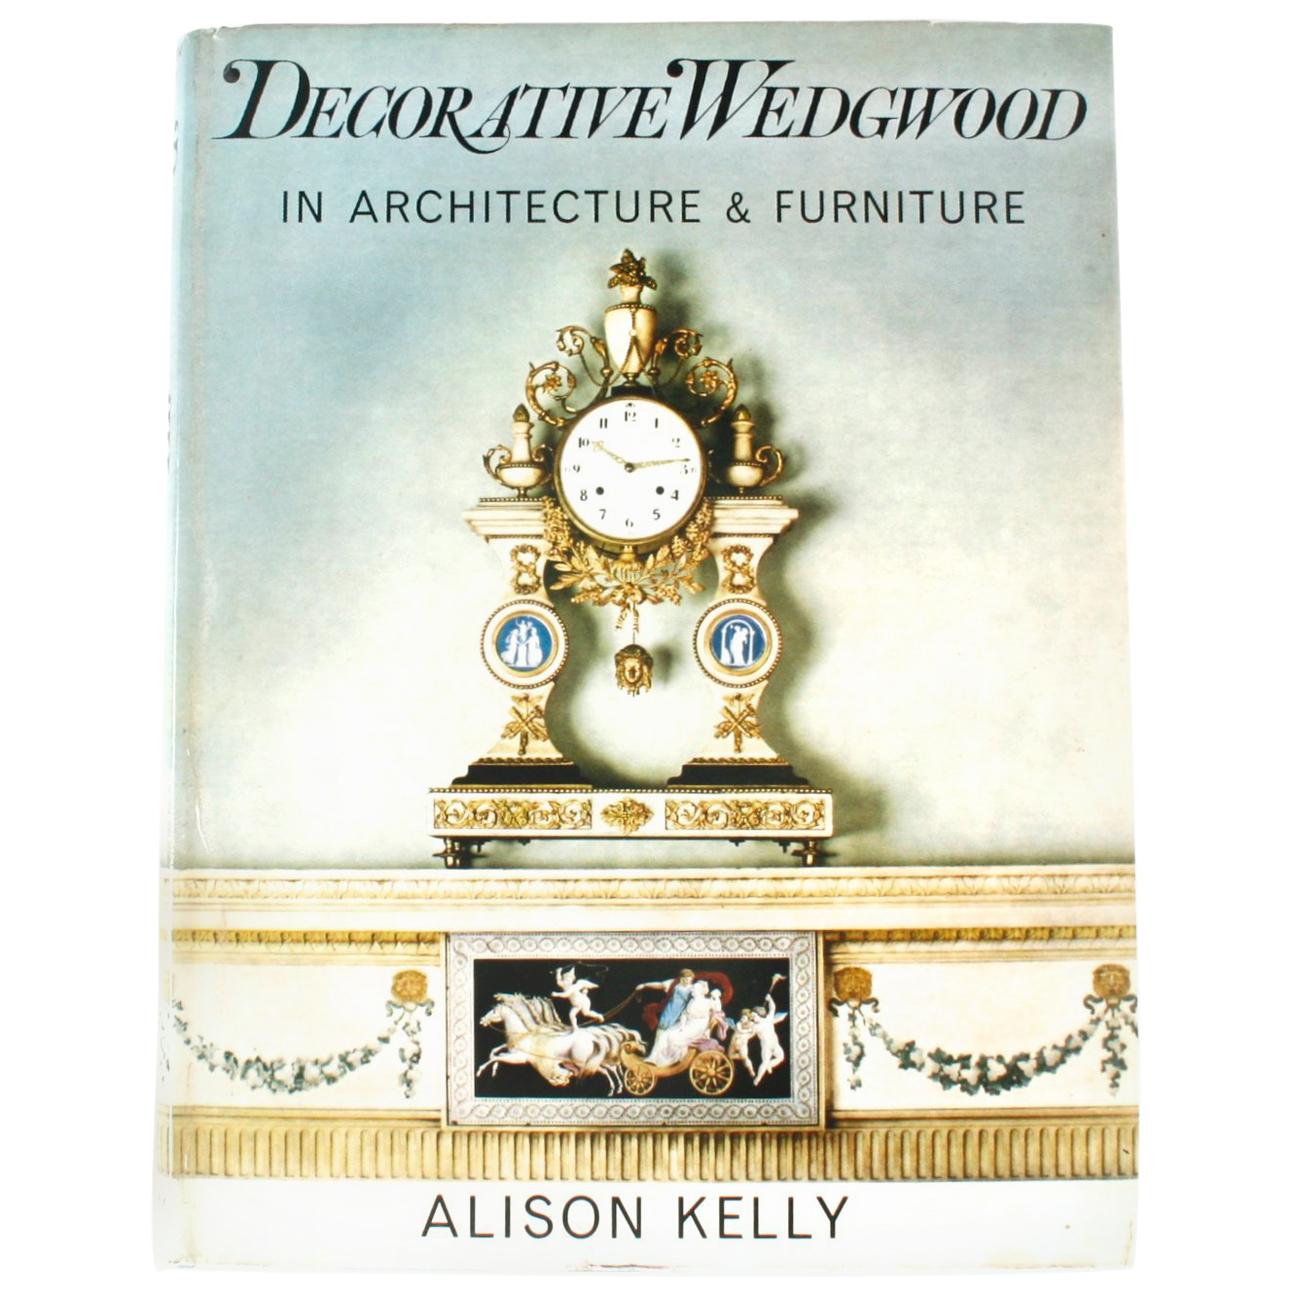 Decorative Wedgwood by Alison Kelly, Signed and Inscribed 1st Edition